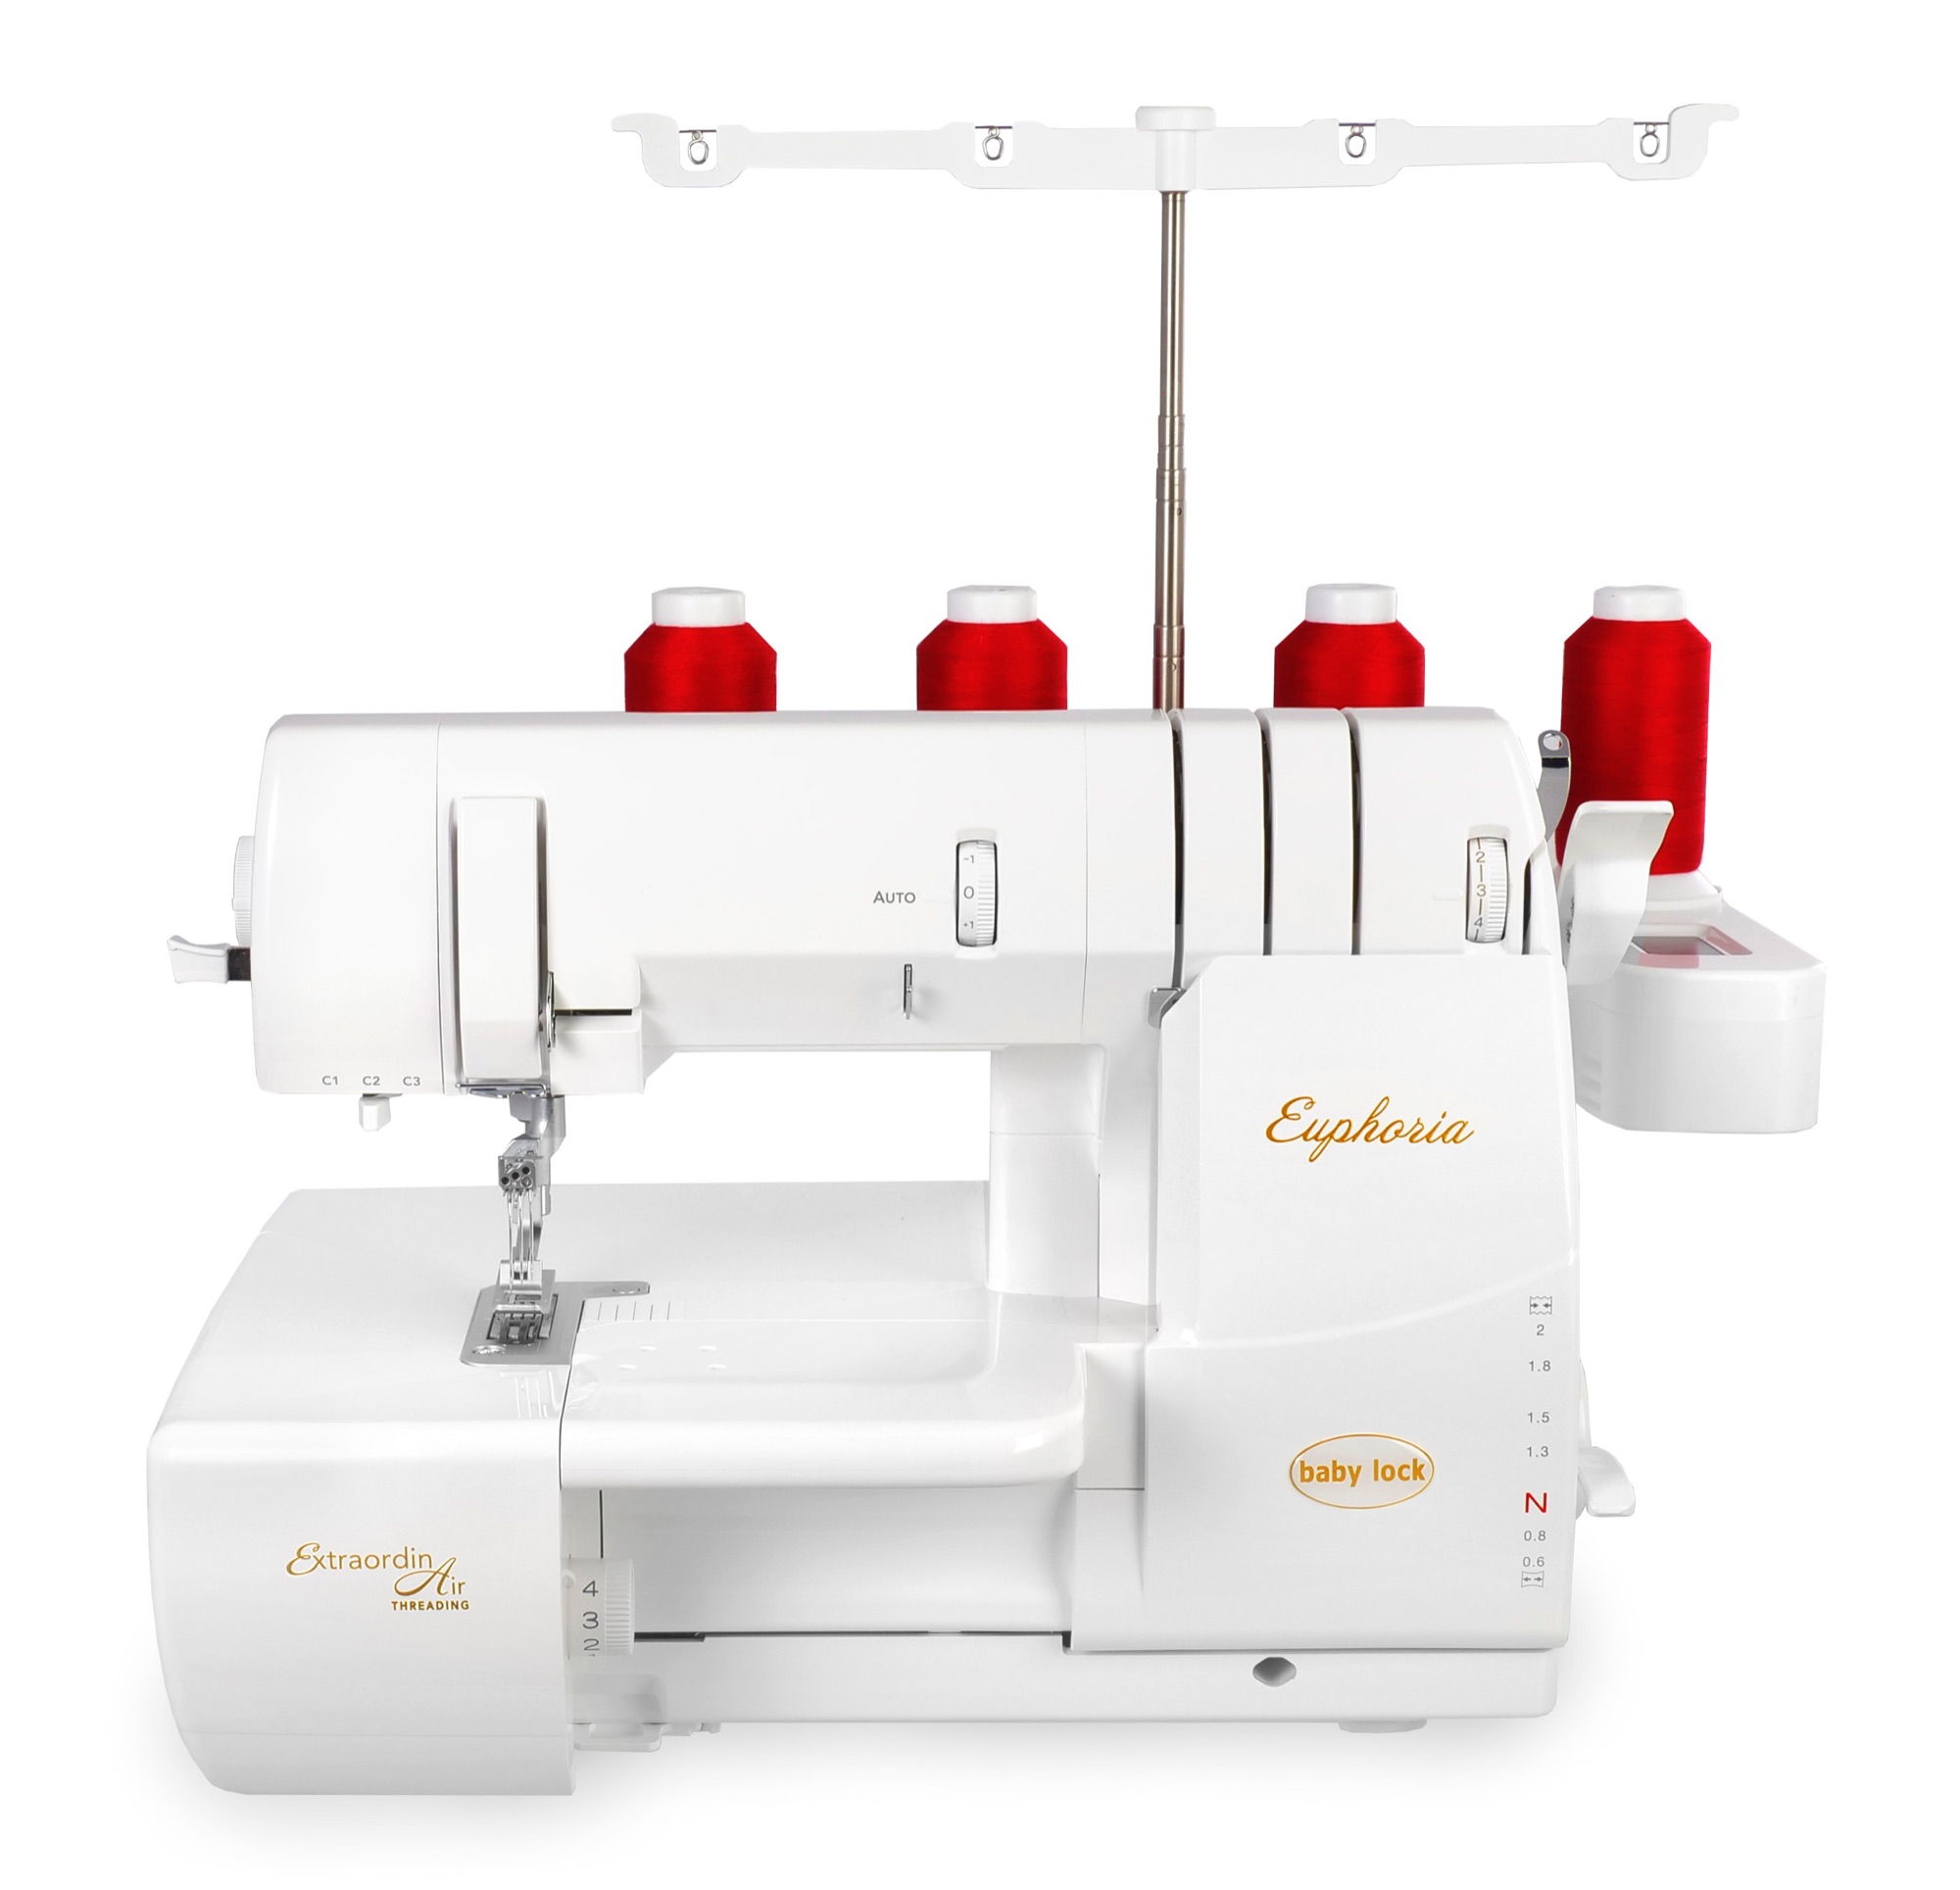 baby lock Euphoria cover stitch machine with automatic tension